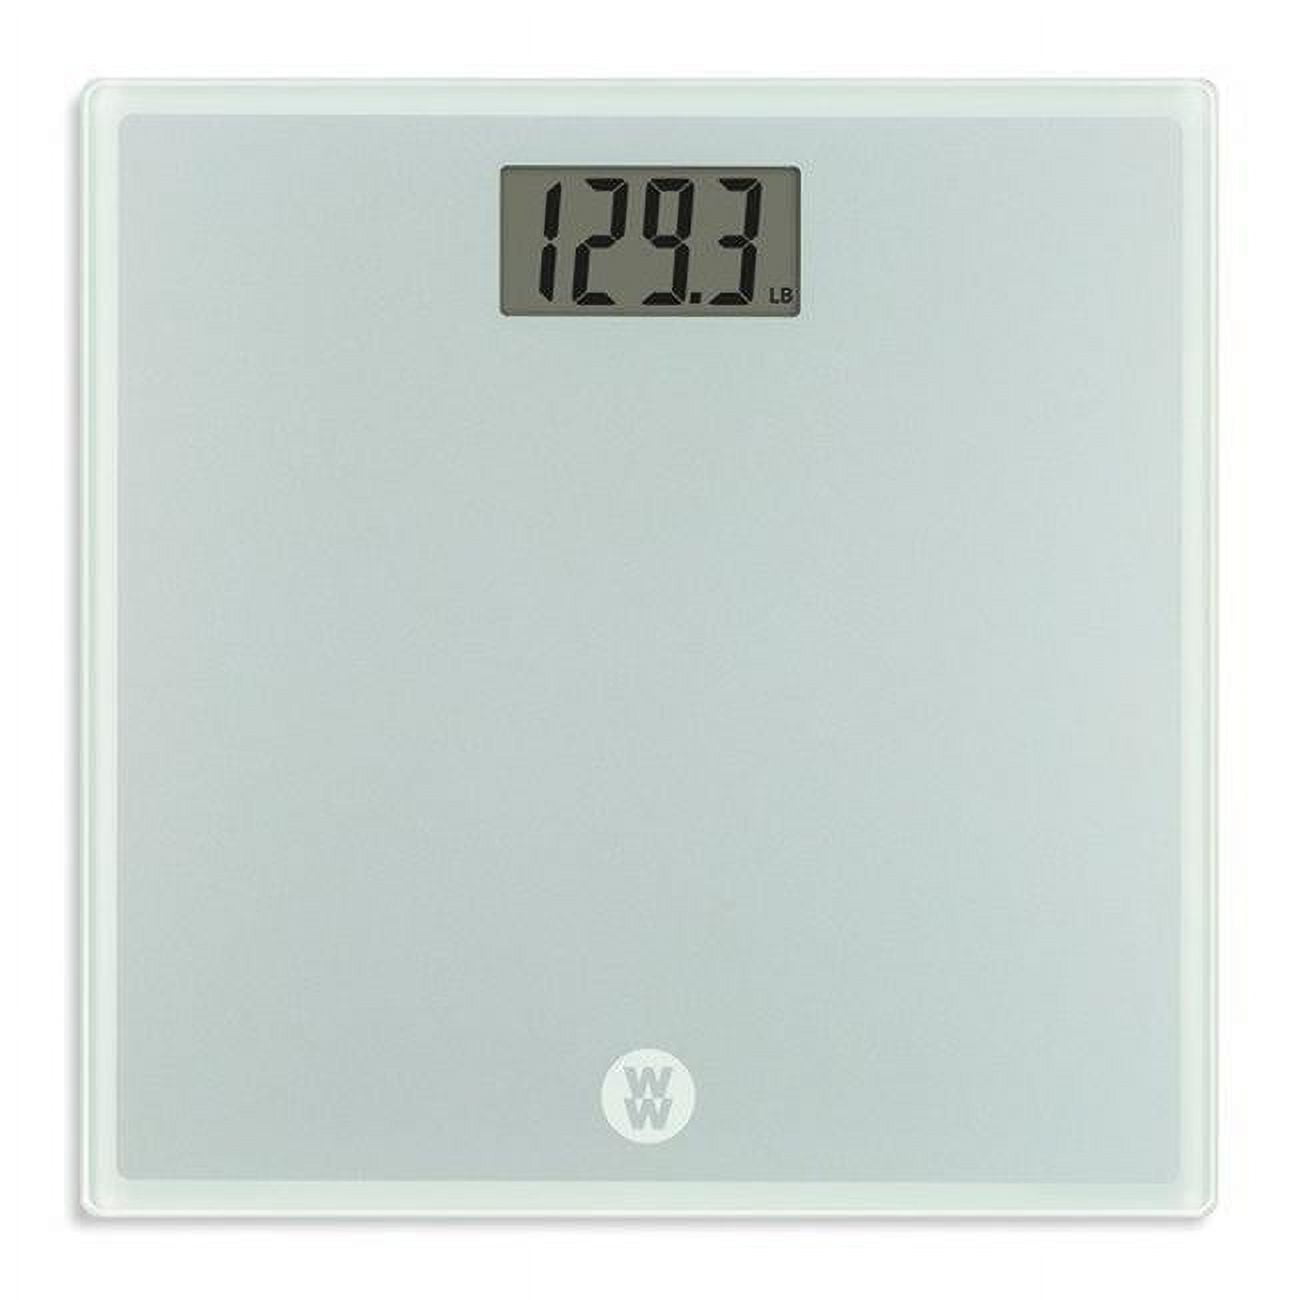  Weight Watchers Scales by Conair Bathroom Scale for